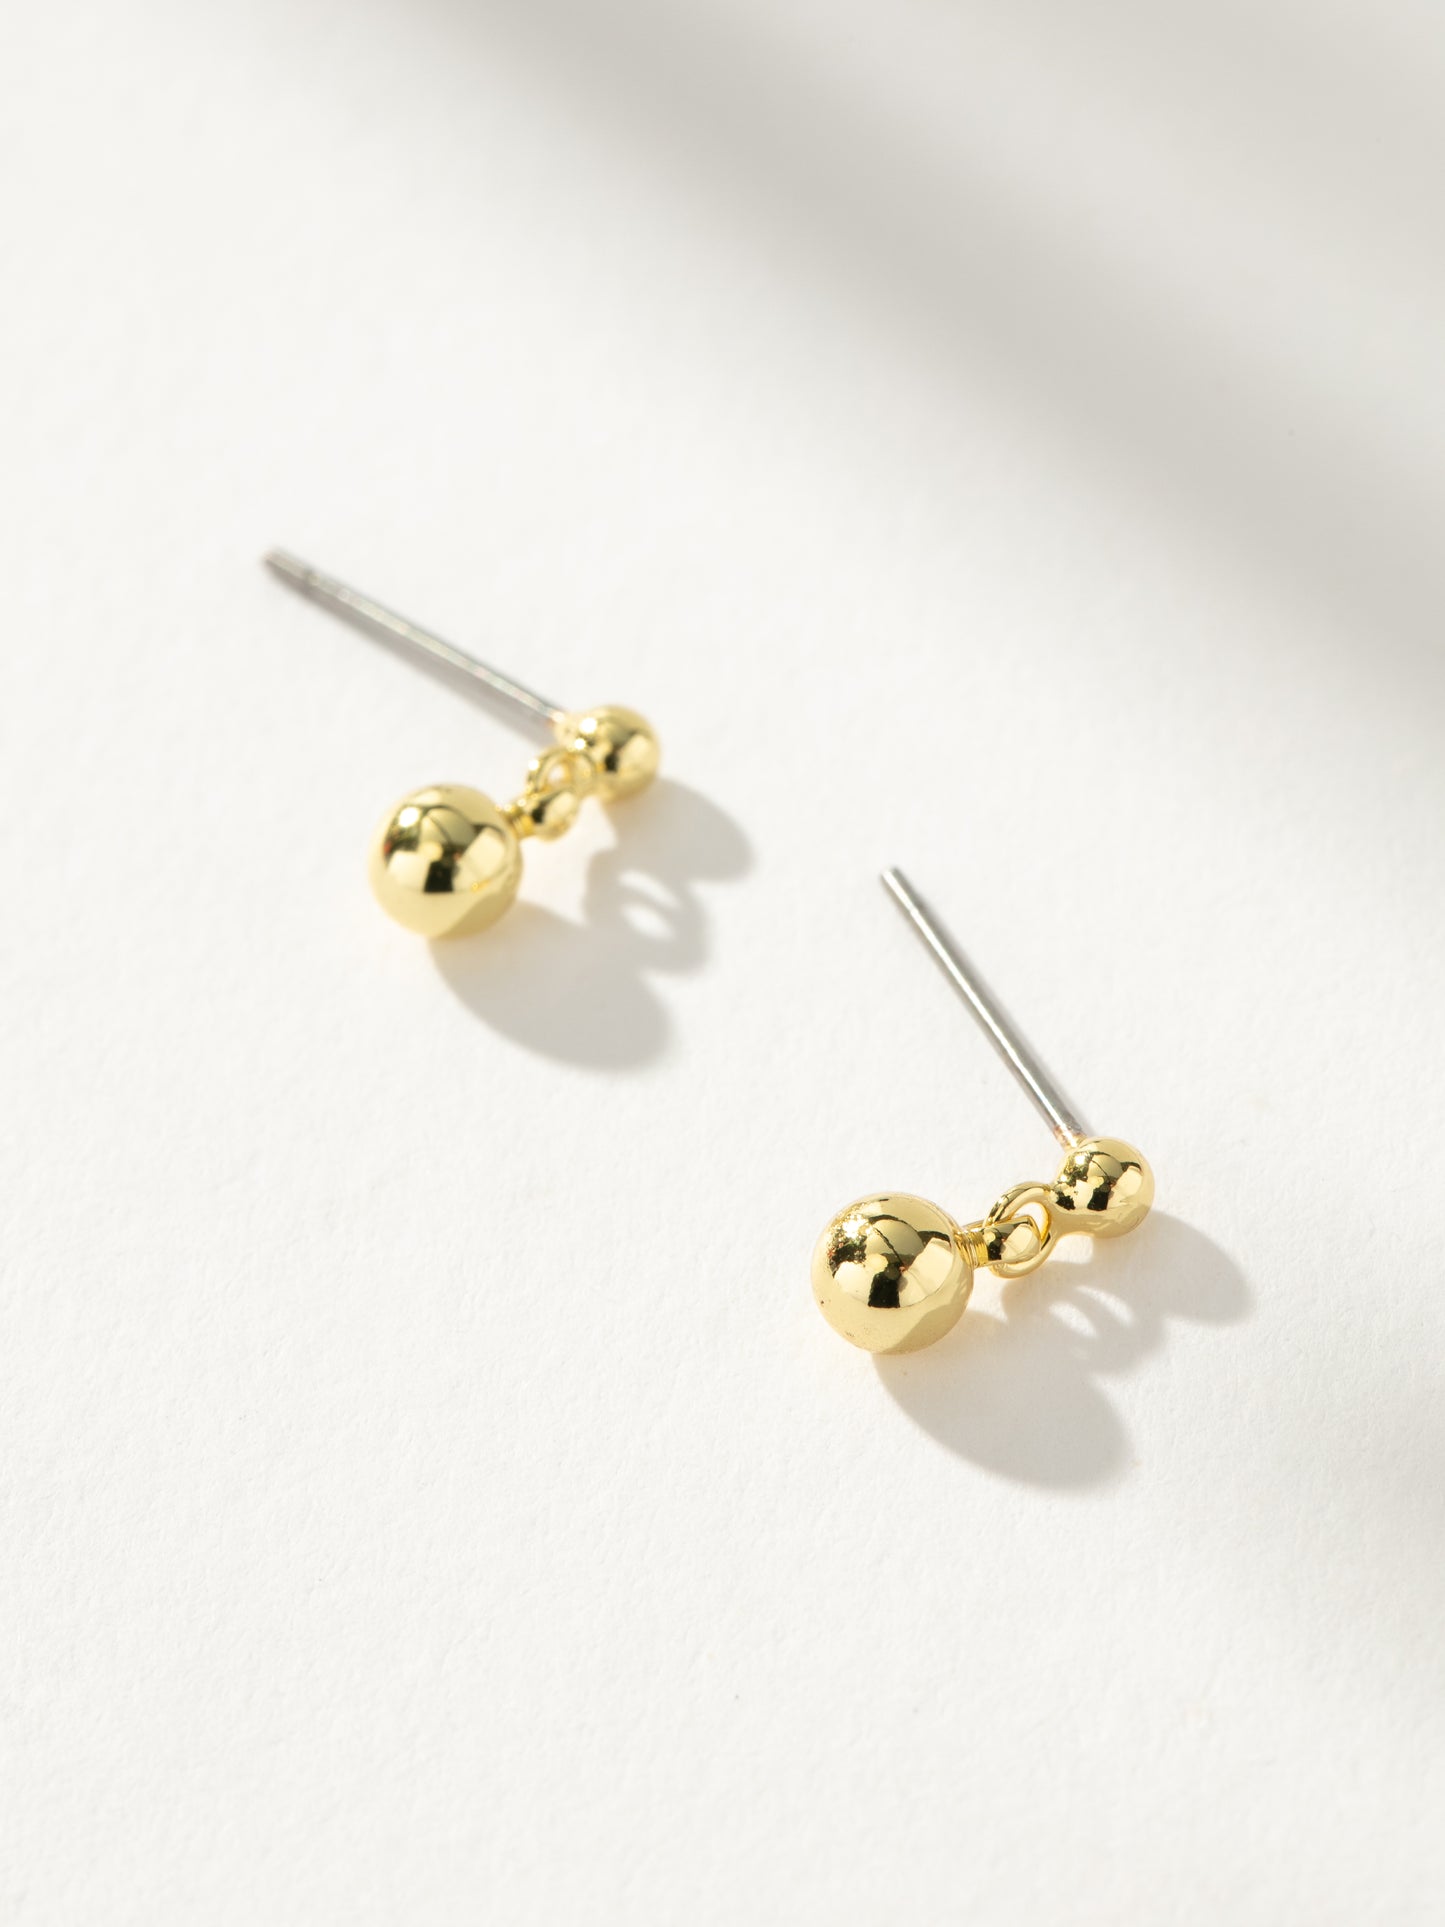 Move On Stud Earrings | Gold | Product Image | Uncommon James